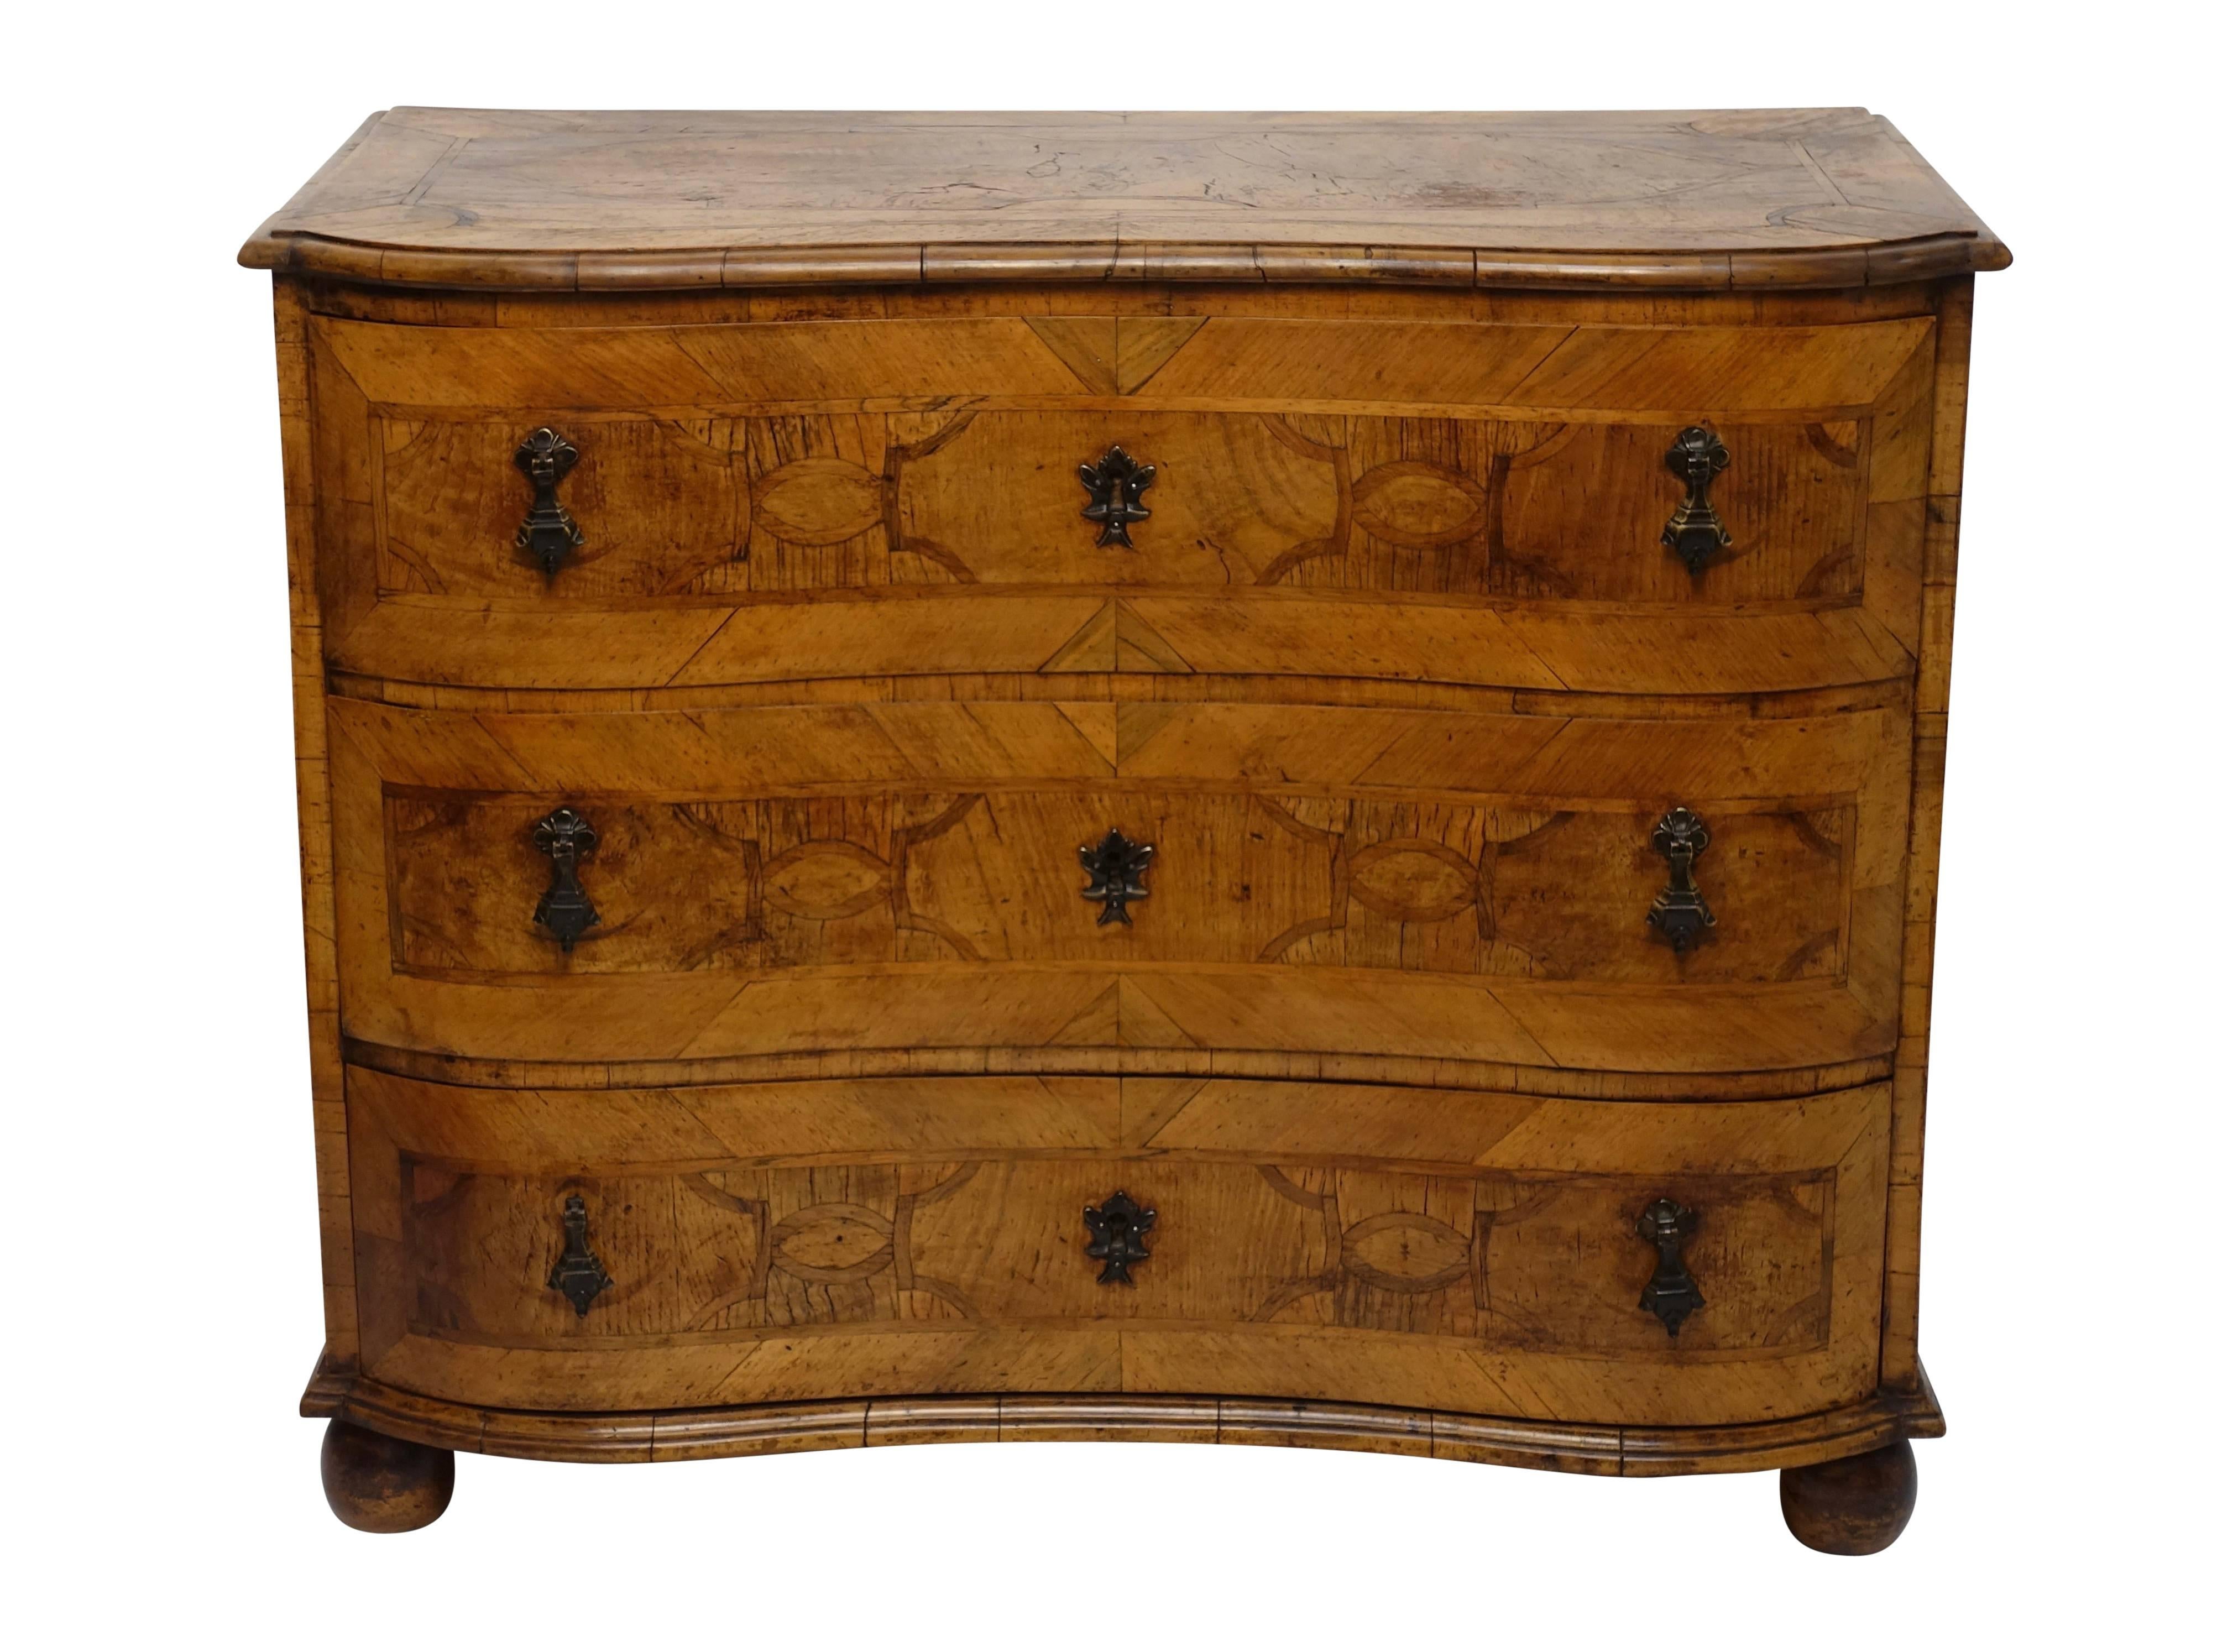 Inlay Italian Walnut and Olivewood Inlaid Chest of Drawers